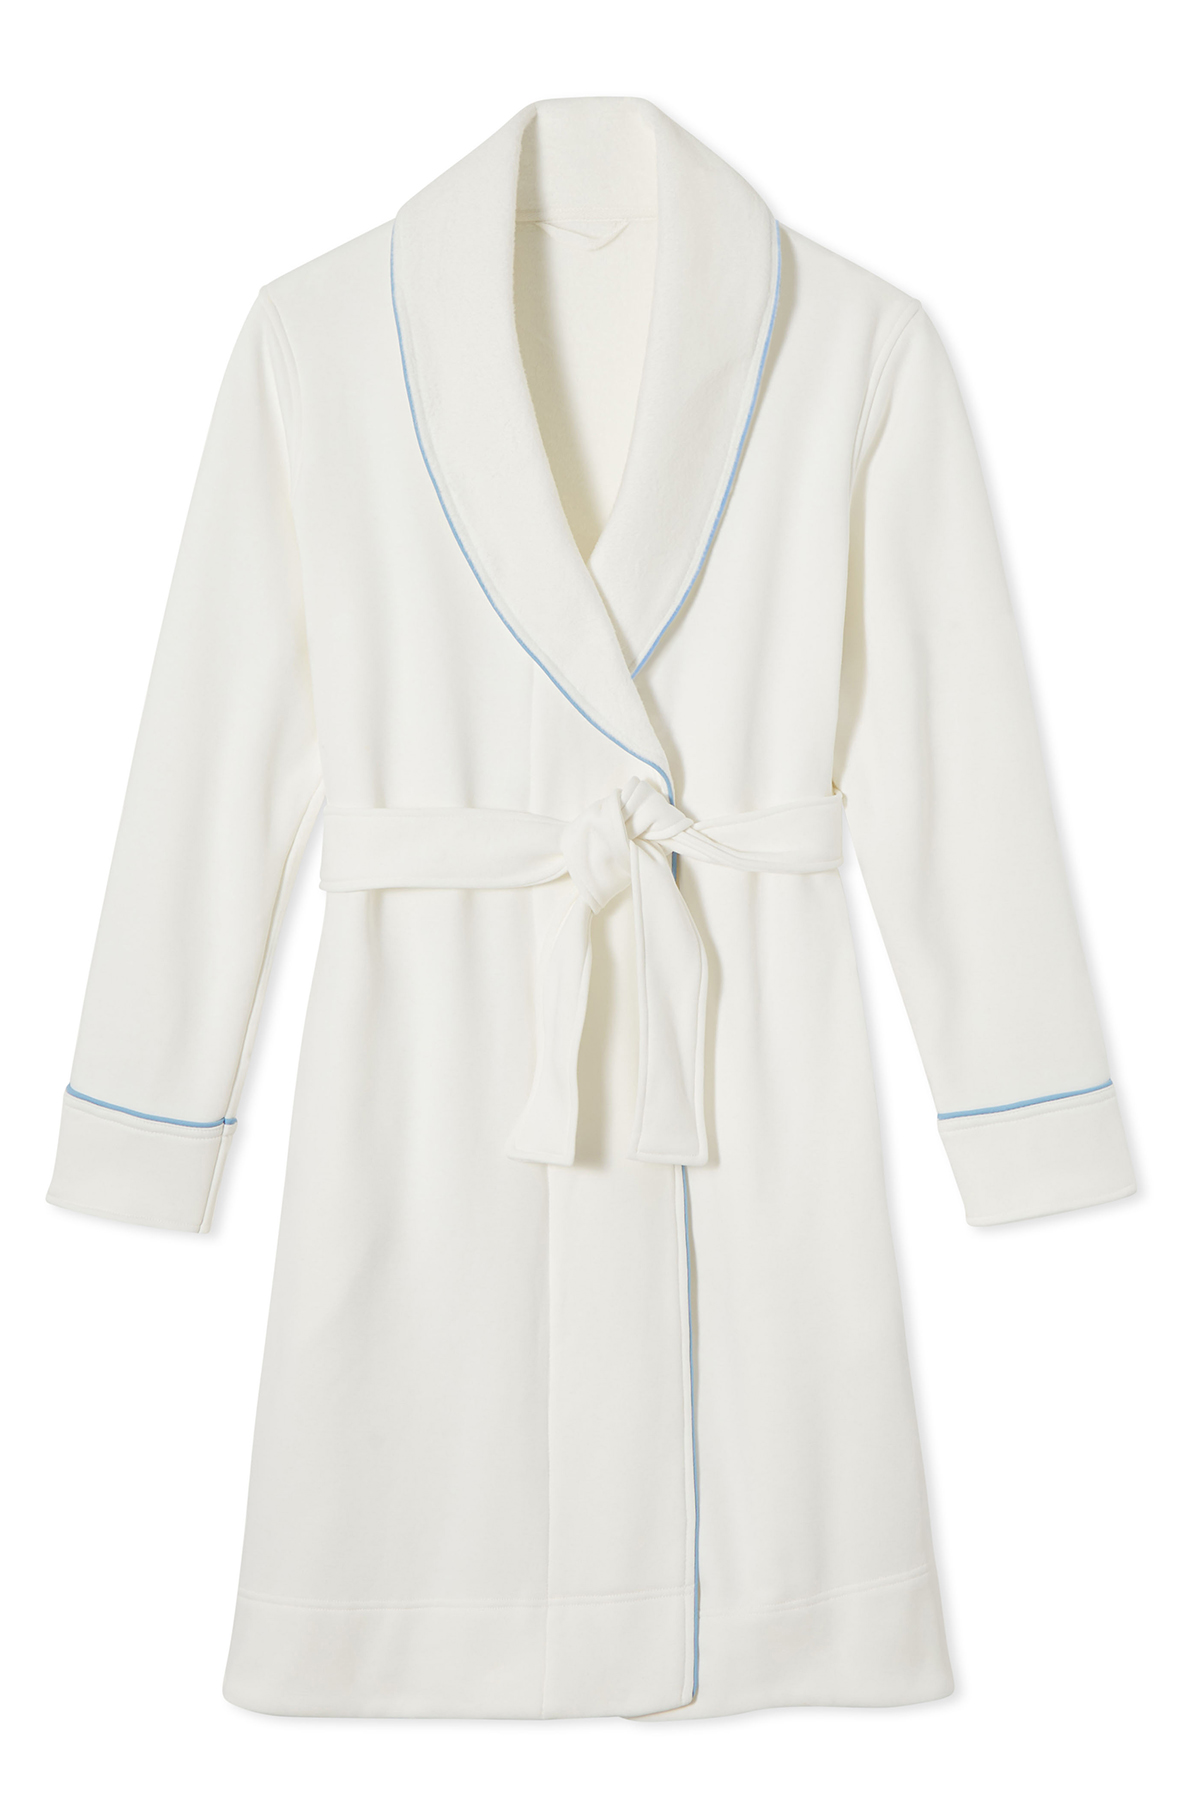 lake pajamas cozy robe in french blue from the black friday sale on a white background